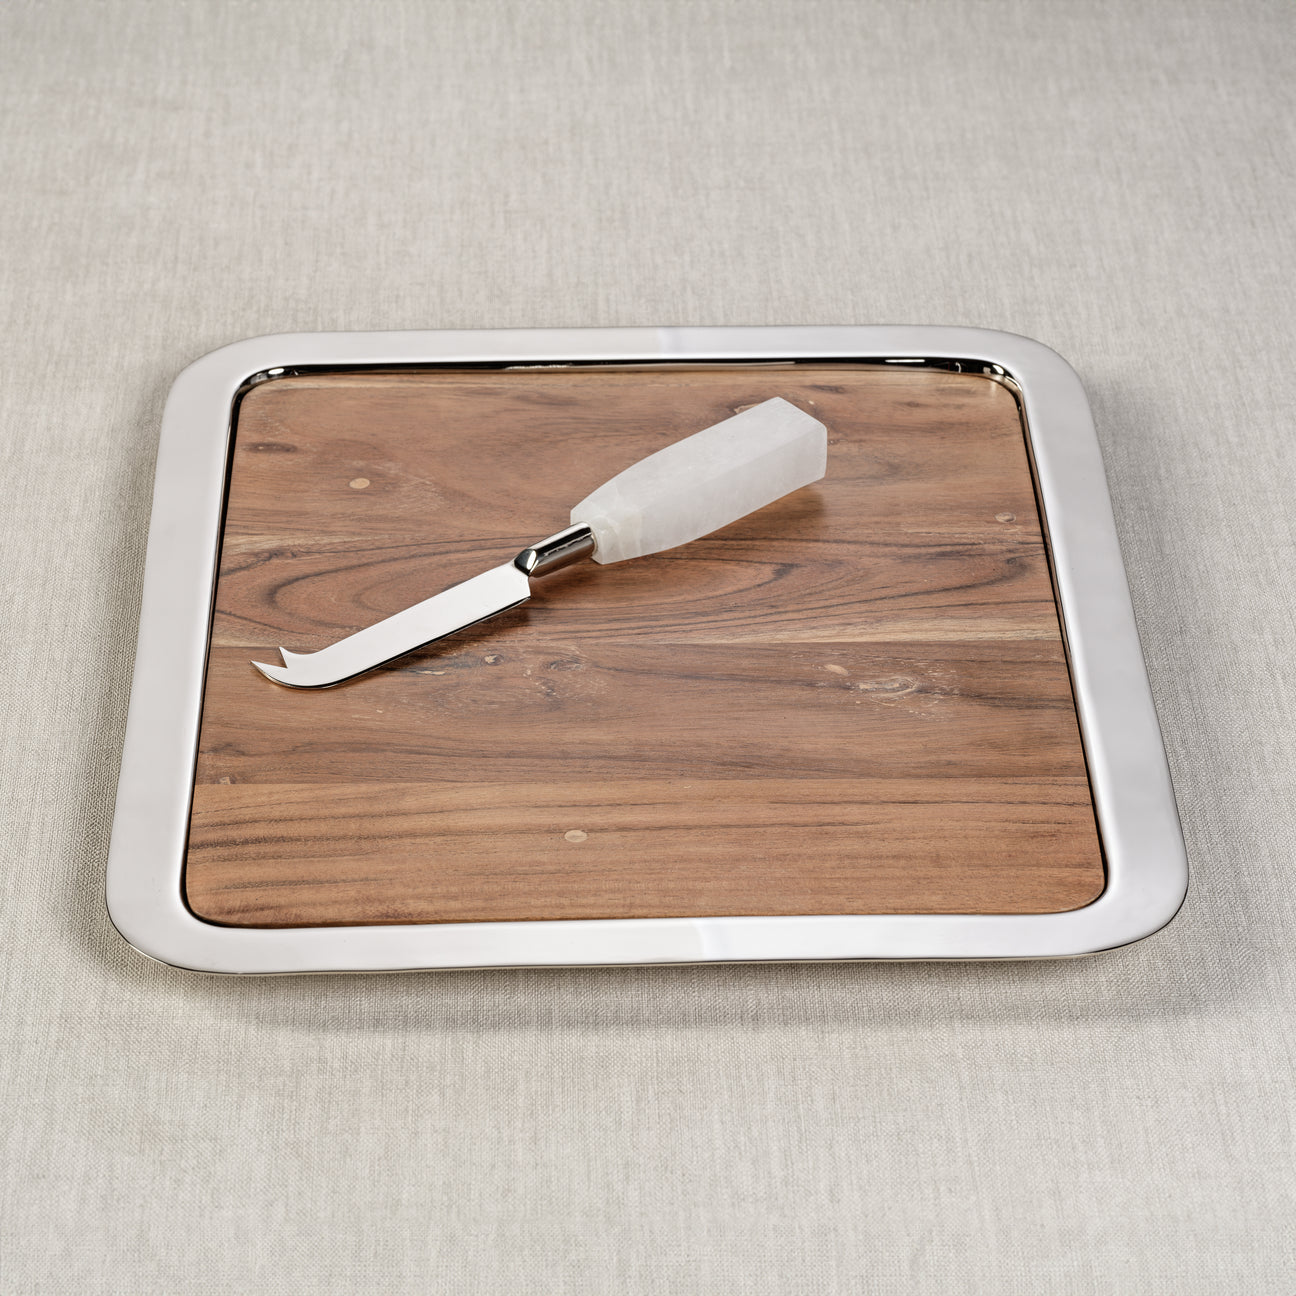 Brasserie Steel and Acacia Wood All-In-One Gastronomy Board